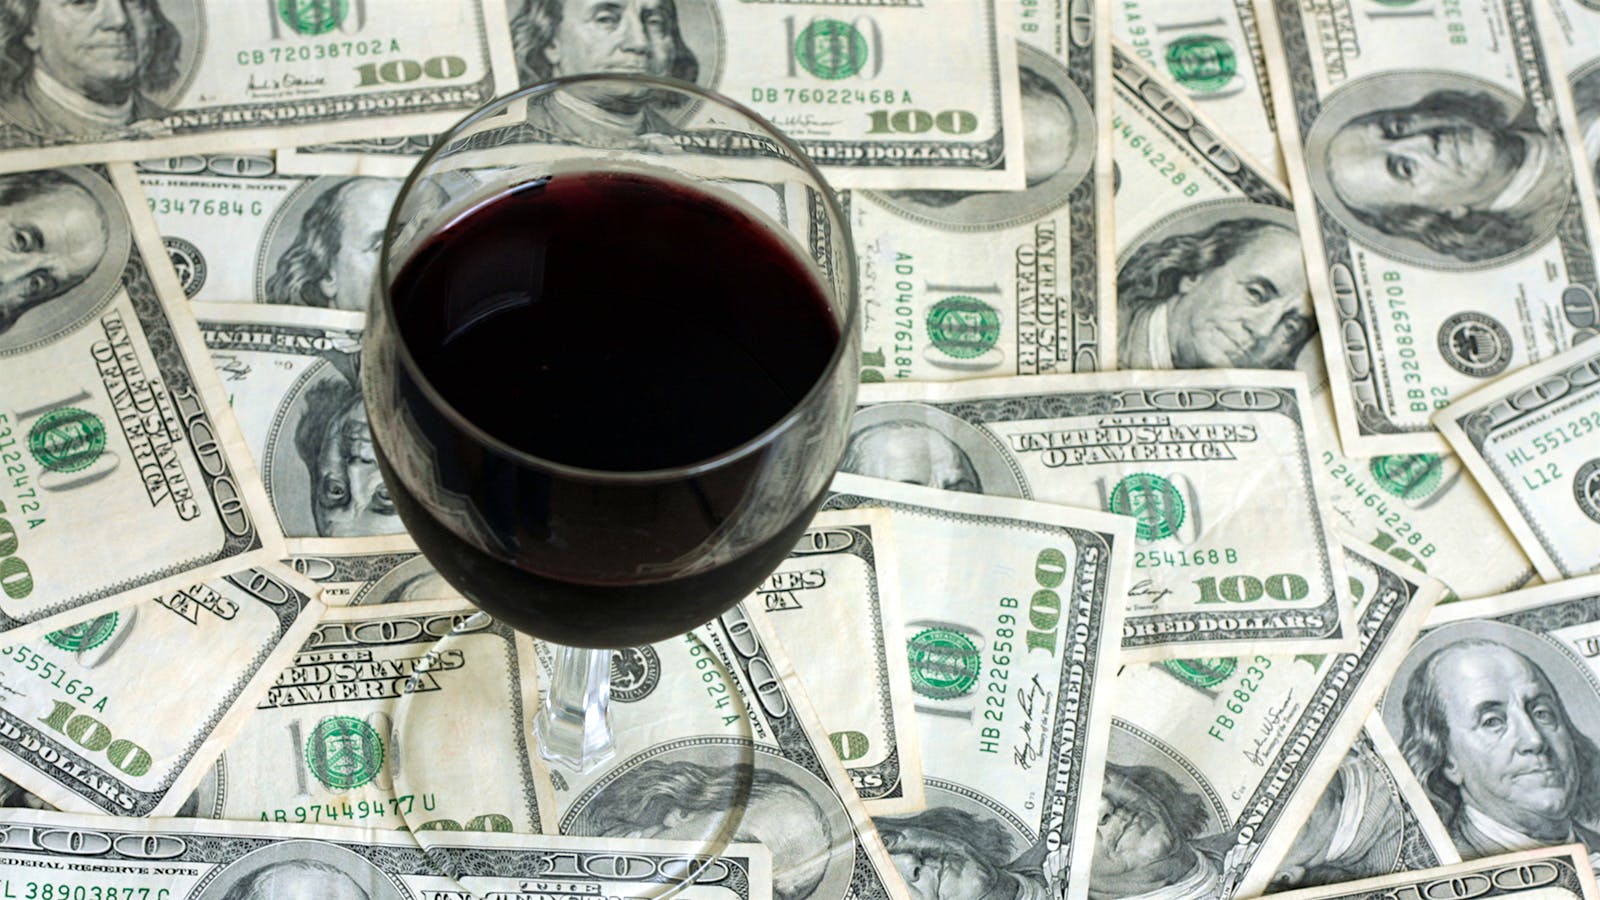 The $110 Million Question: Is Alcohol Good for You?